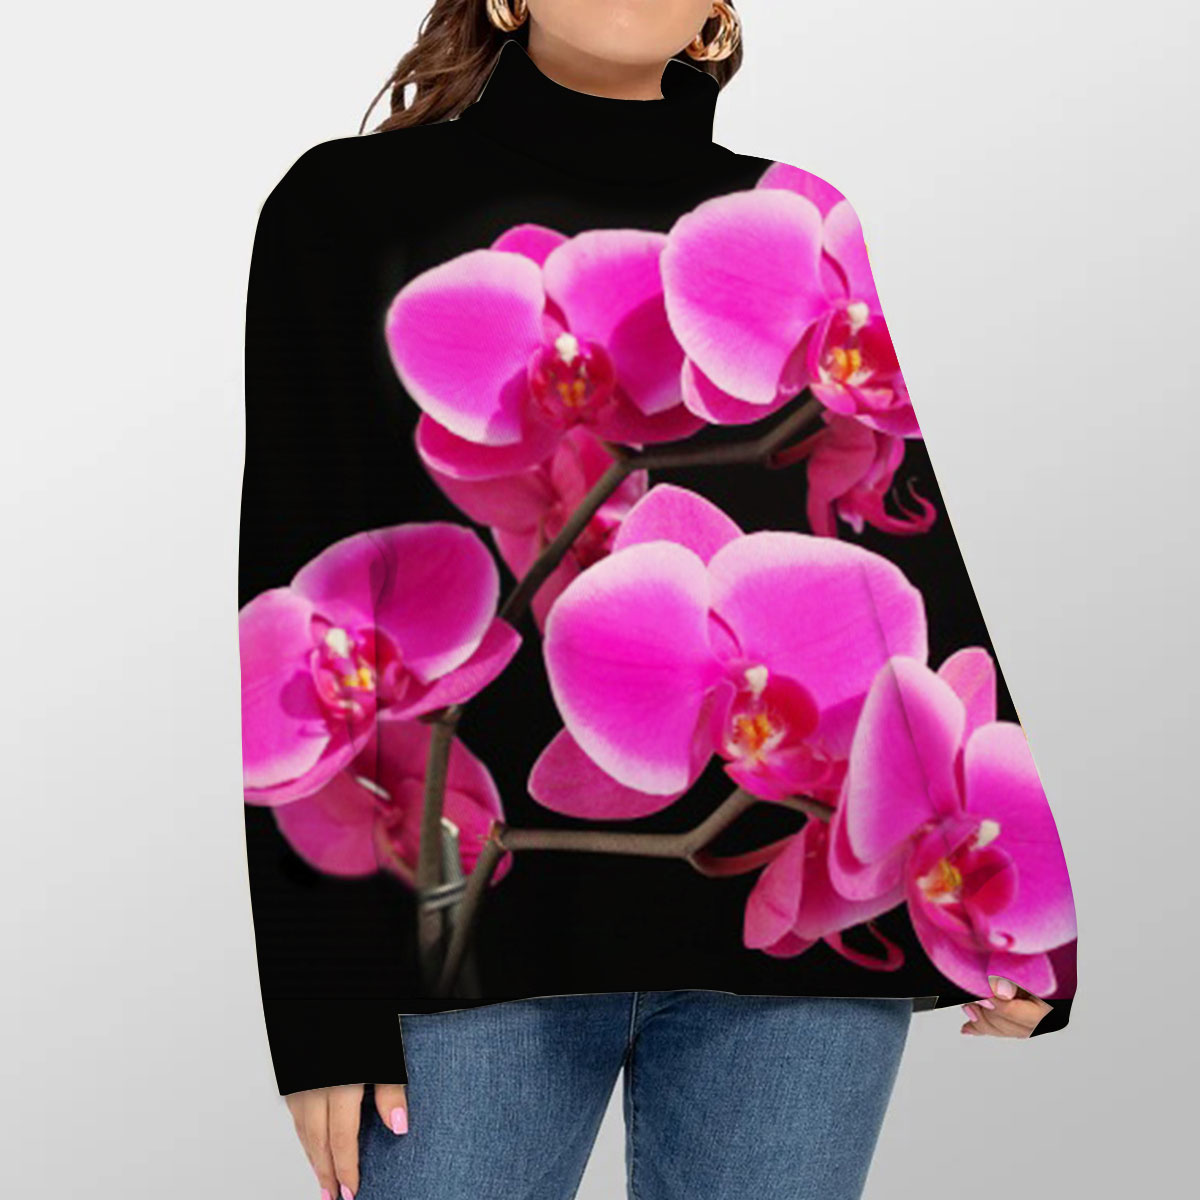 Black And Pink Orchidd Turtleneck Sweater